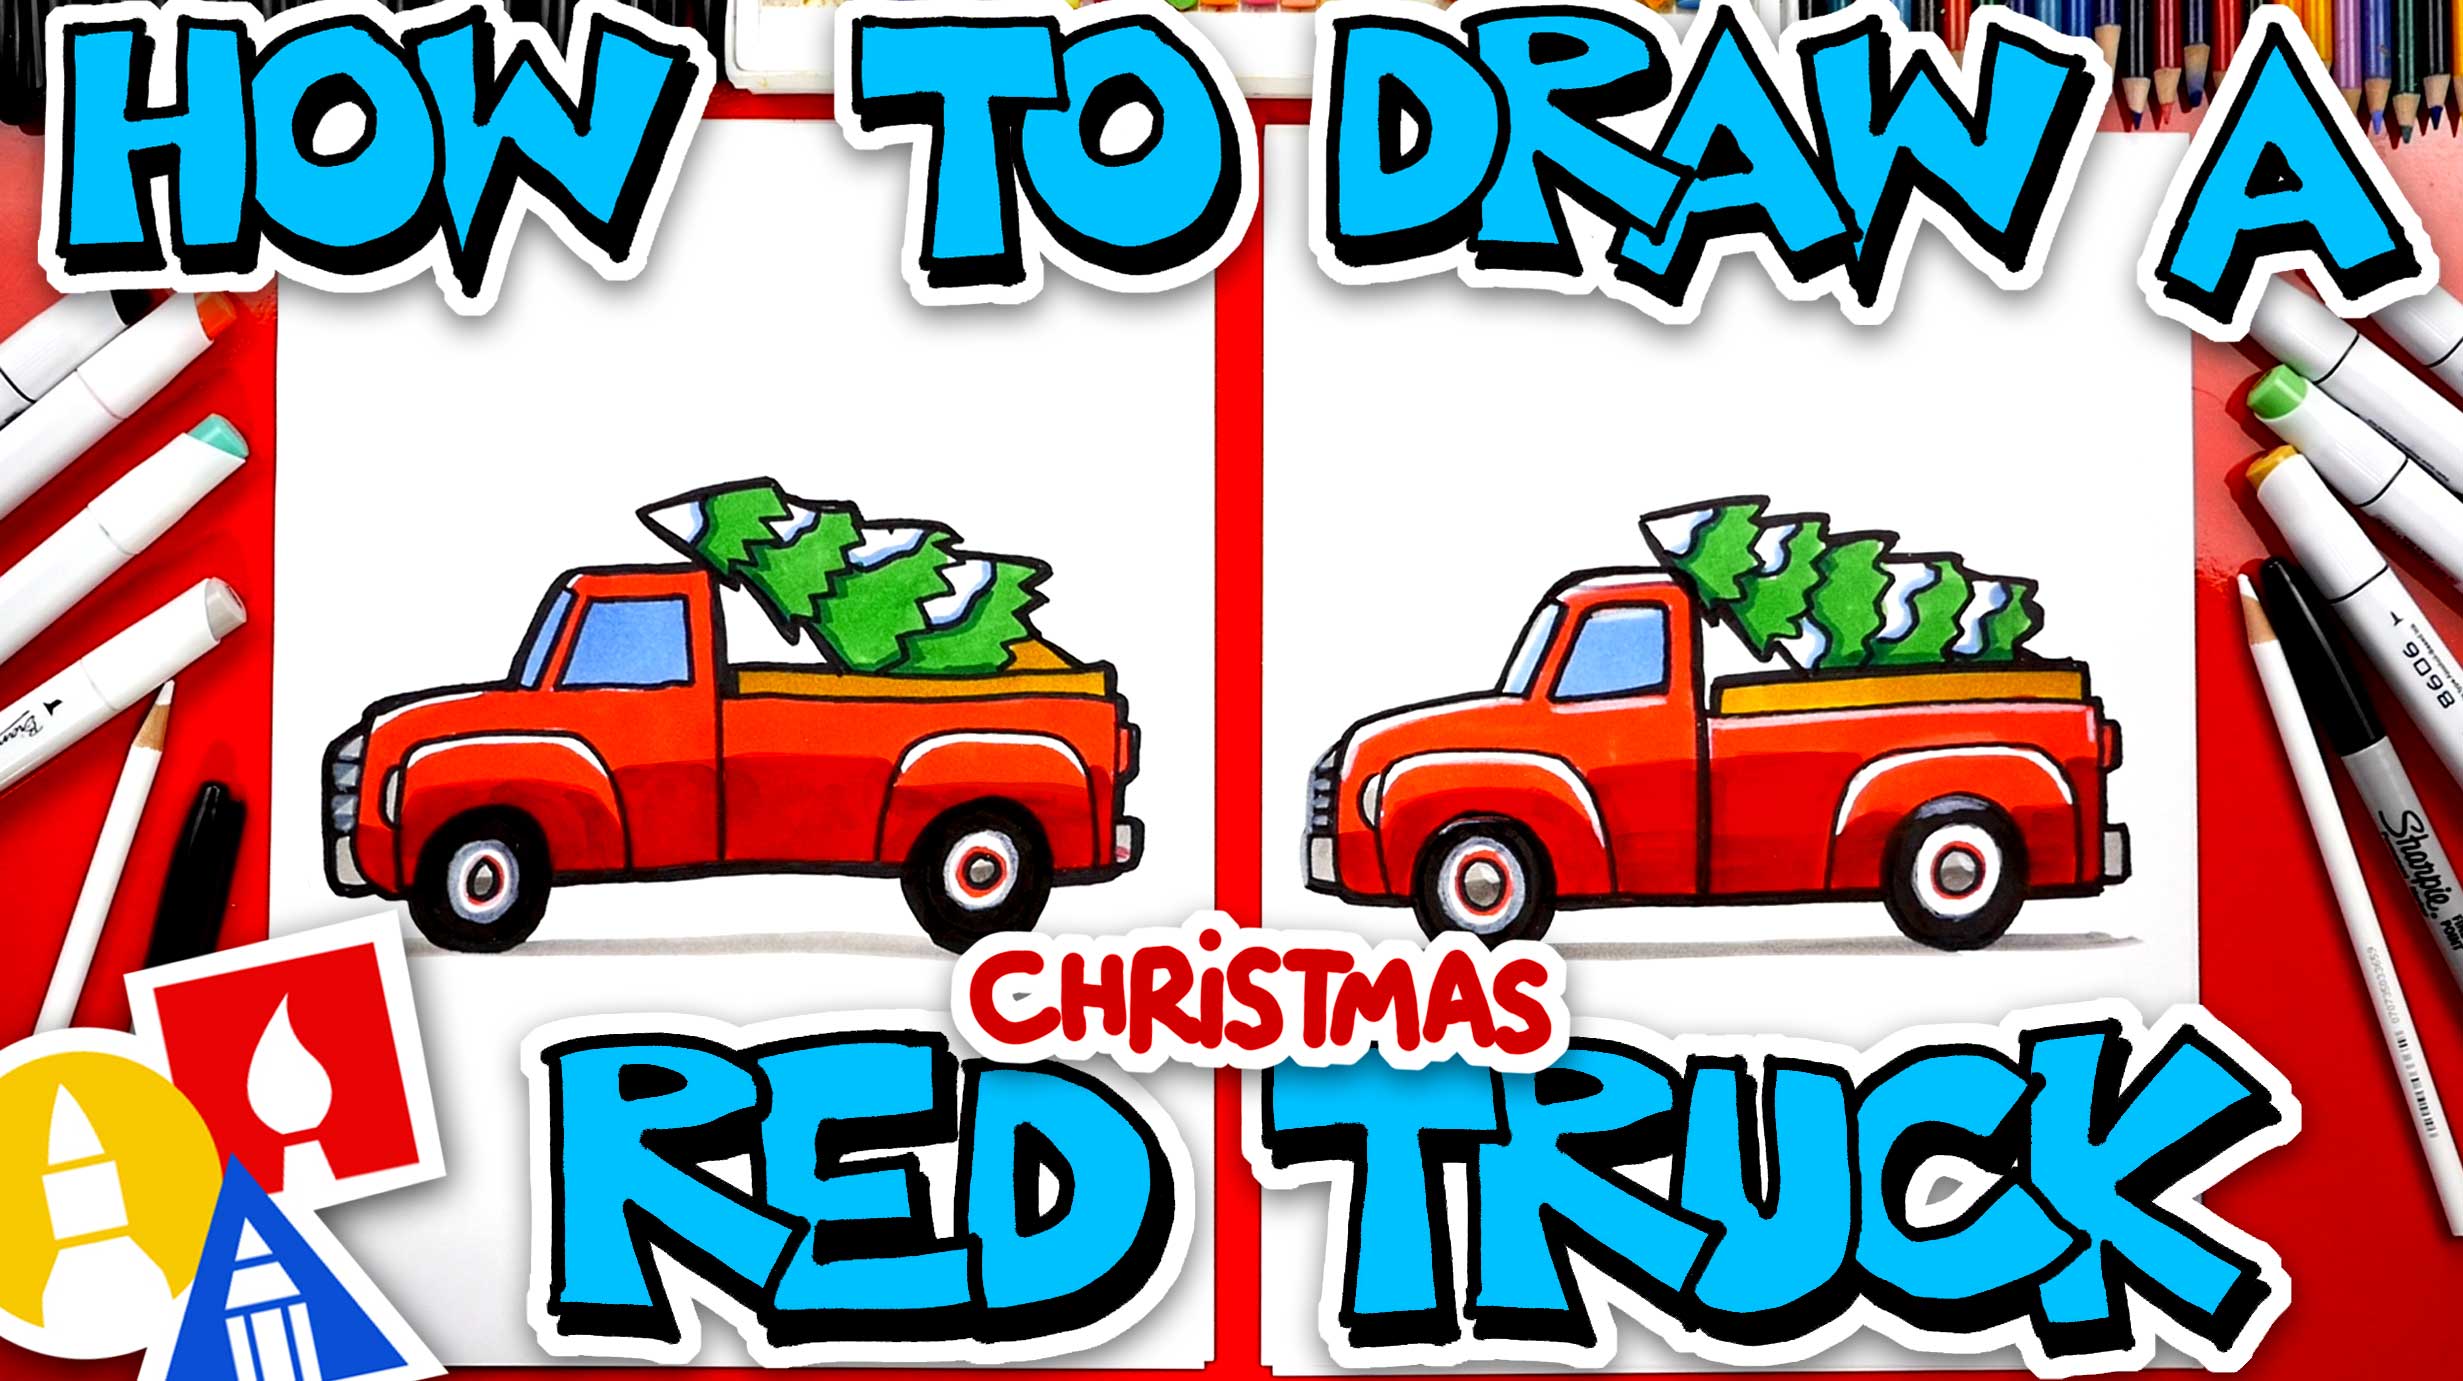 How To Draw A Red Christmas Truck With Tree - Art For Kids Hub